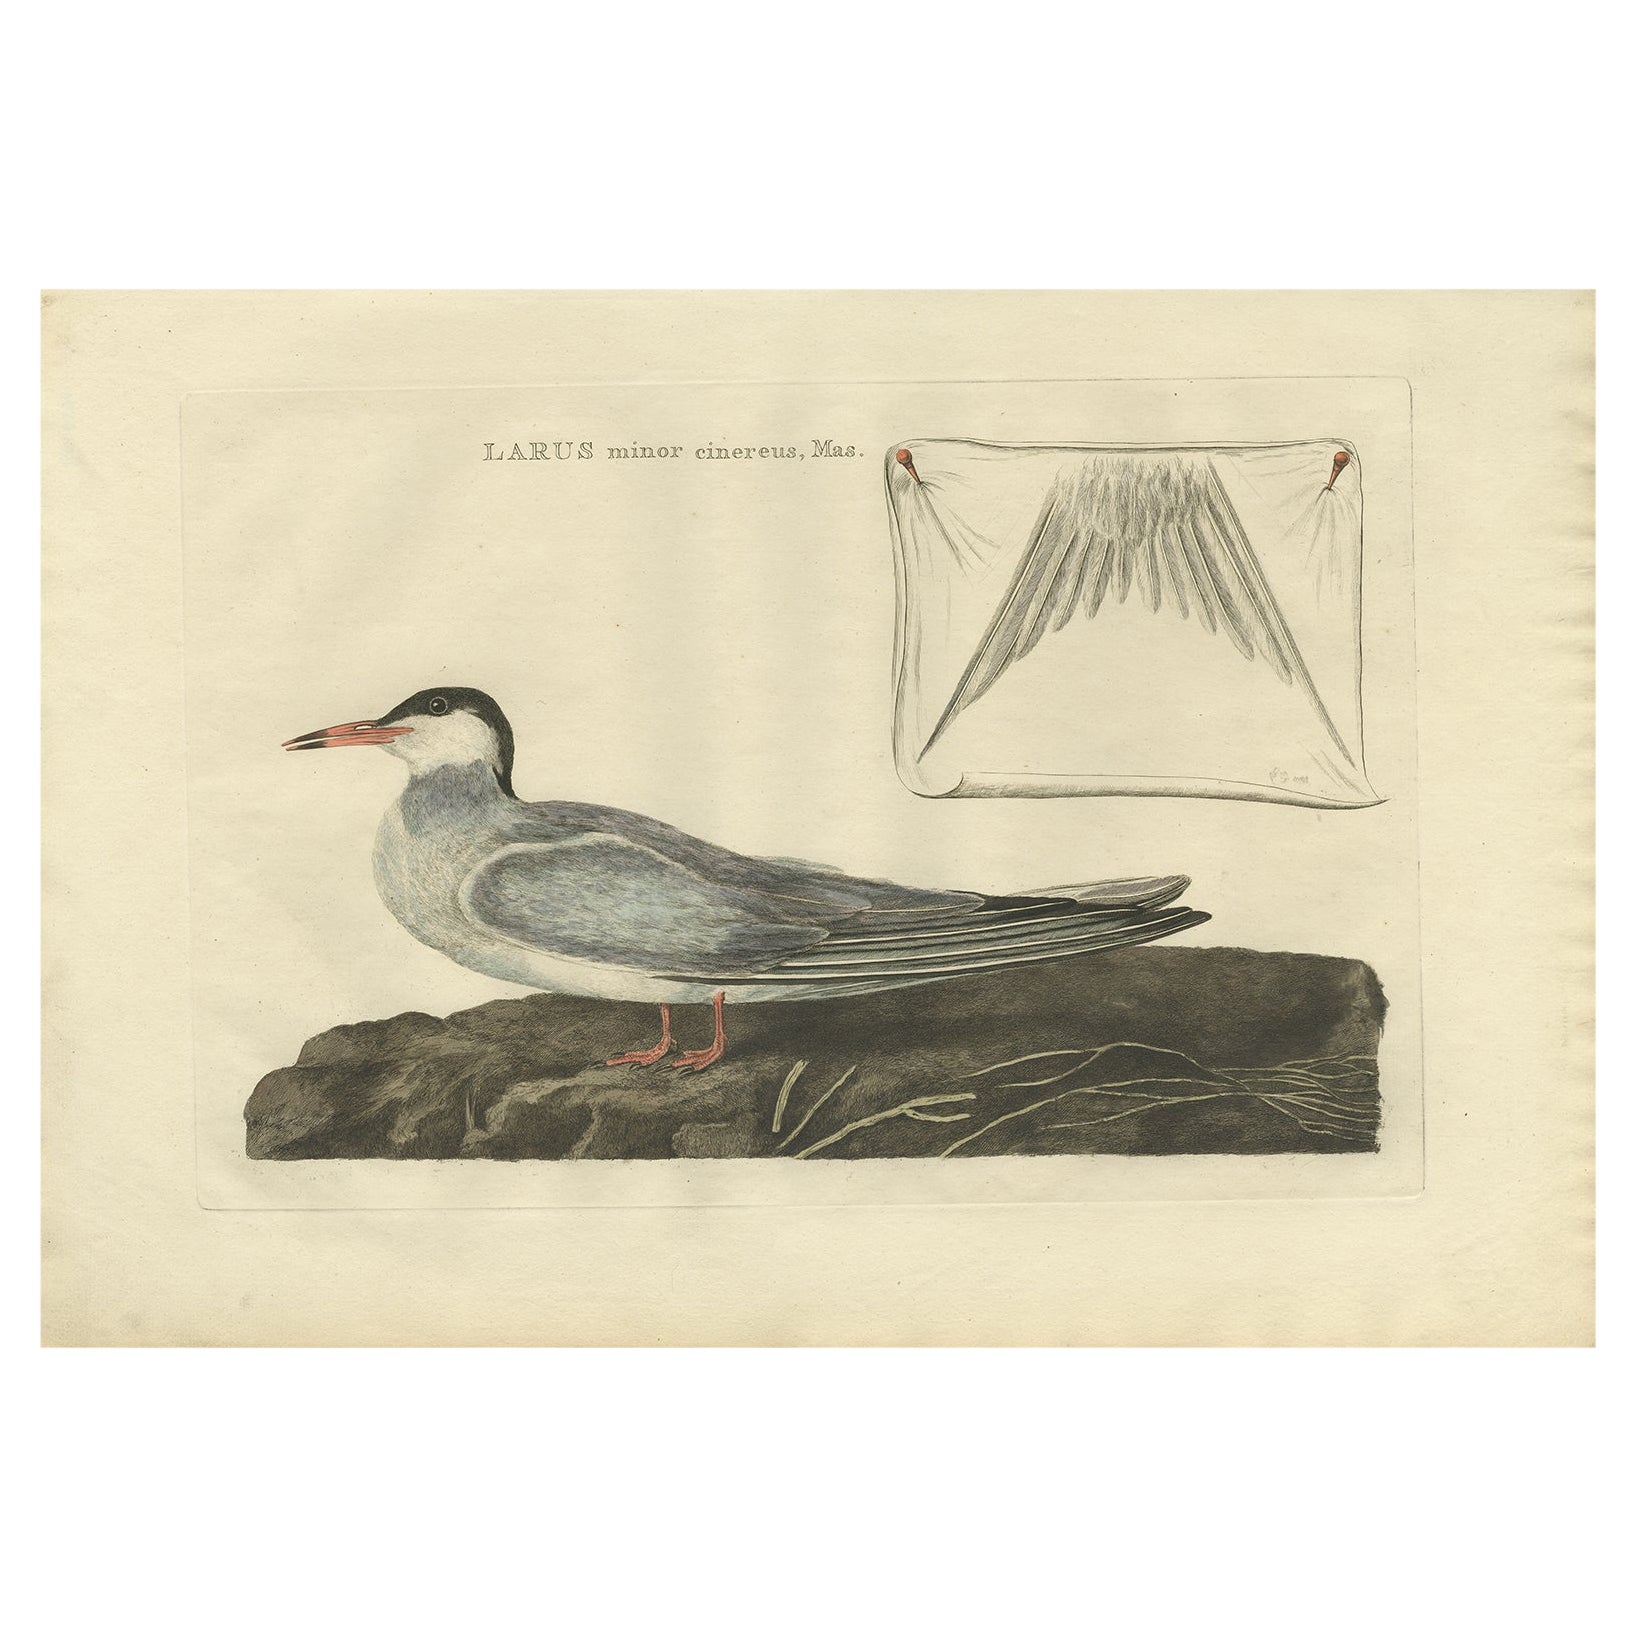 Antique Bird Print of the Male Common Tern by Sepp & Nozeman, 1789